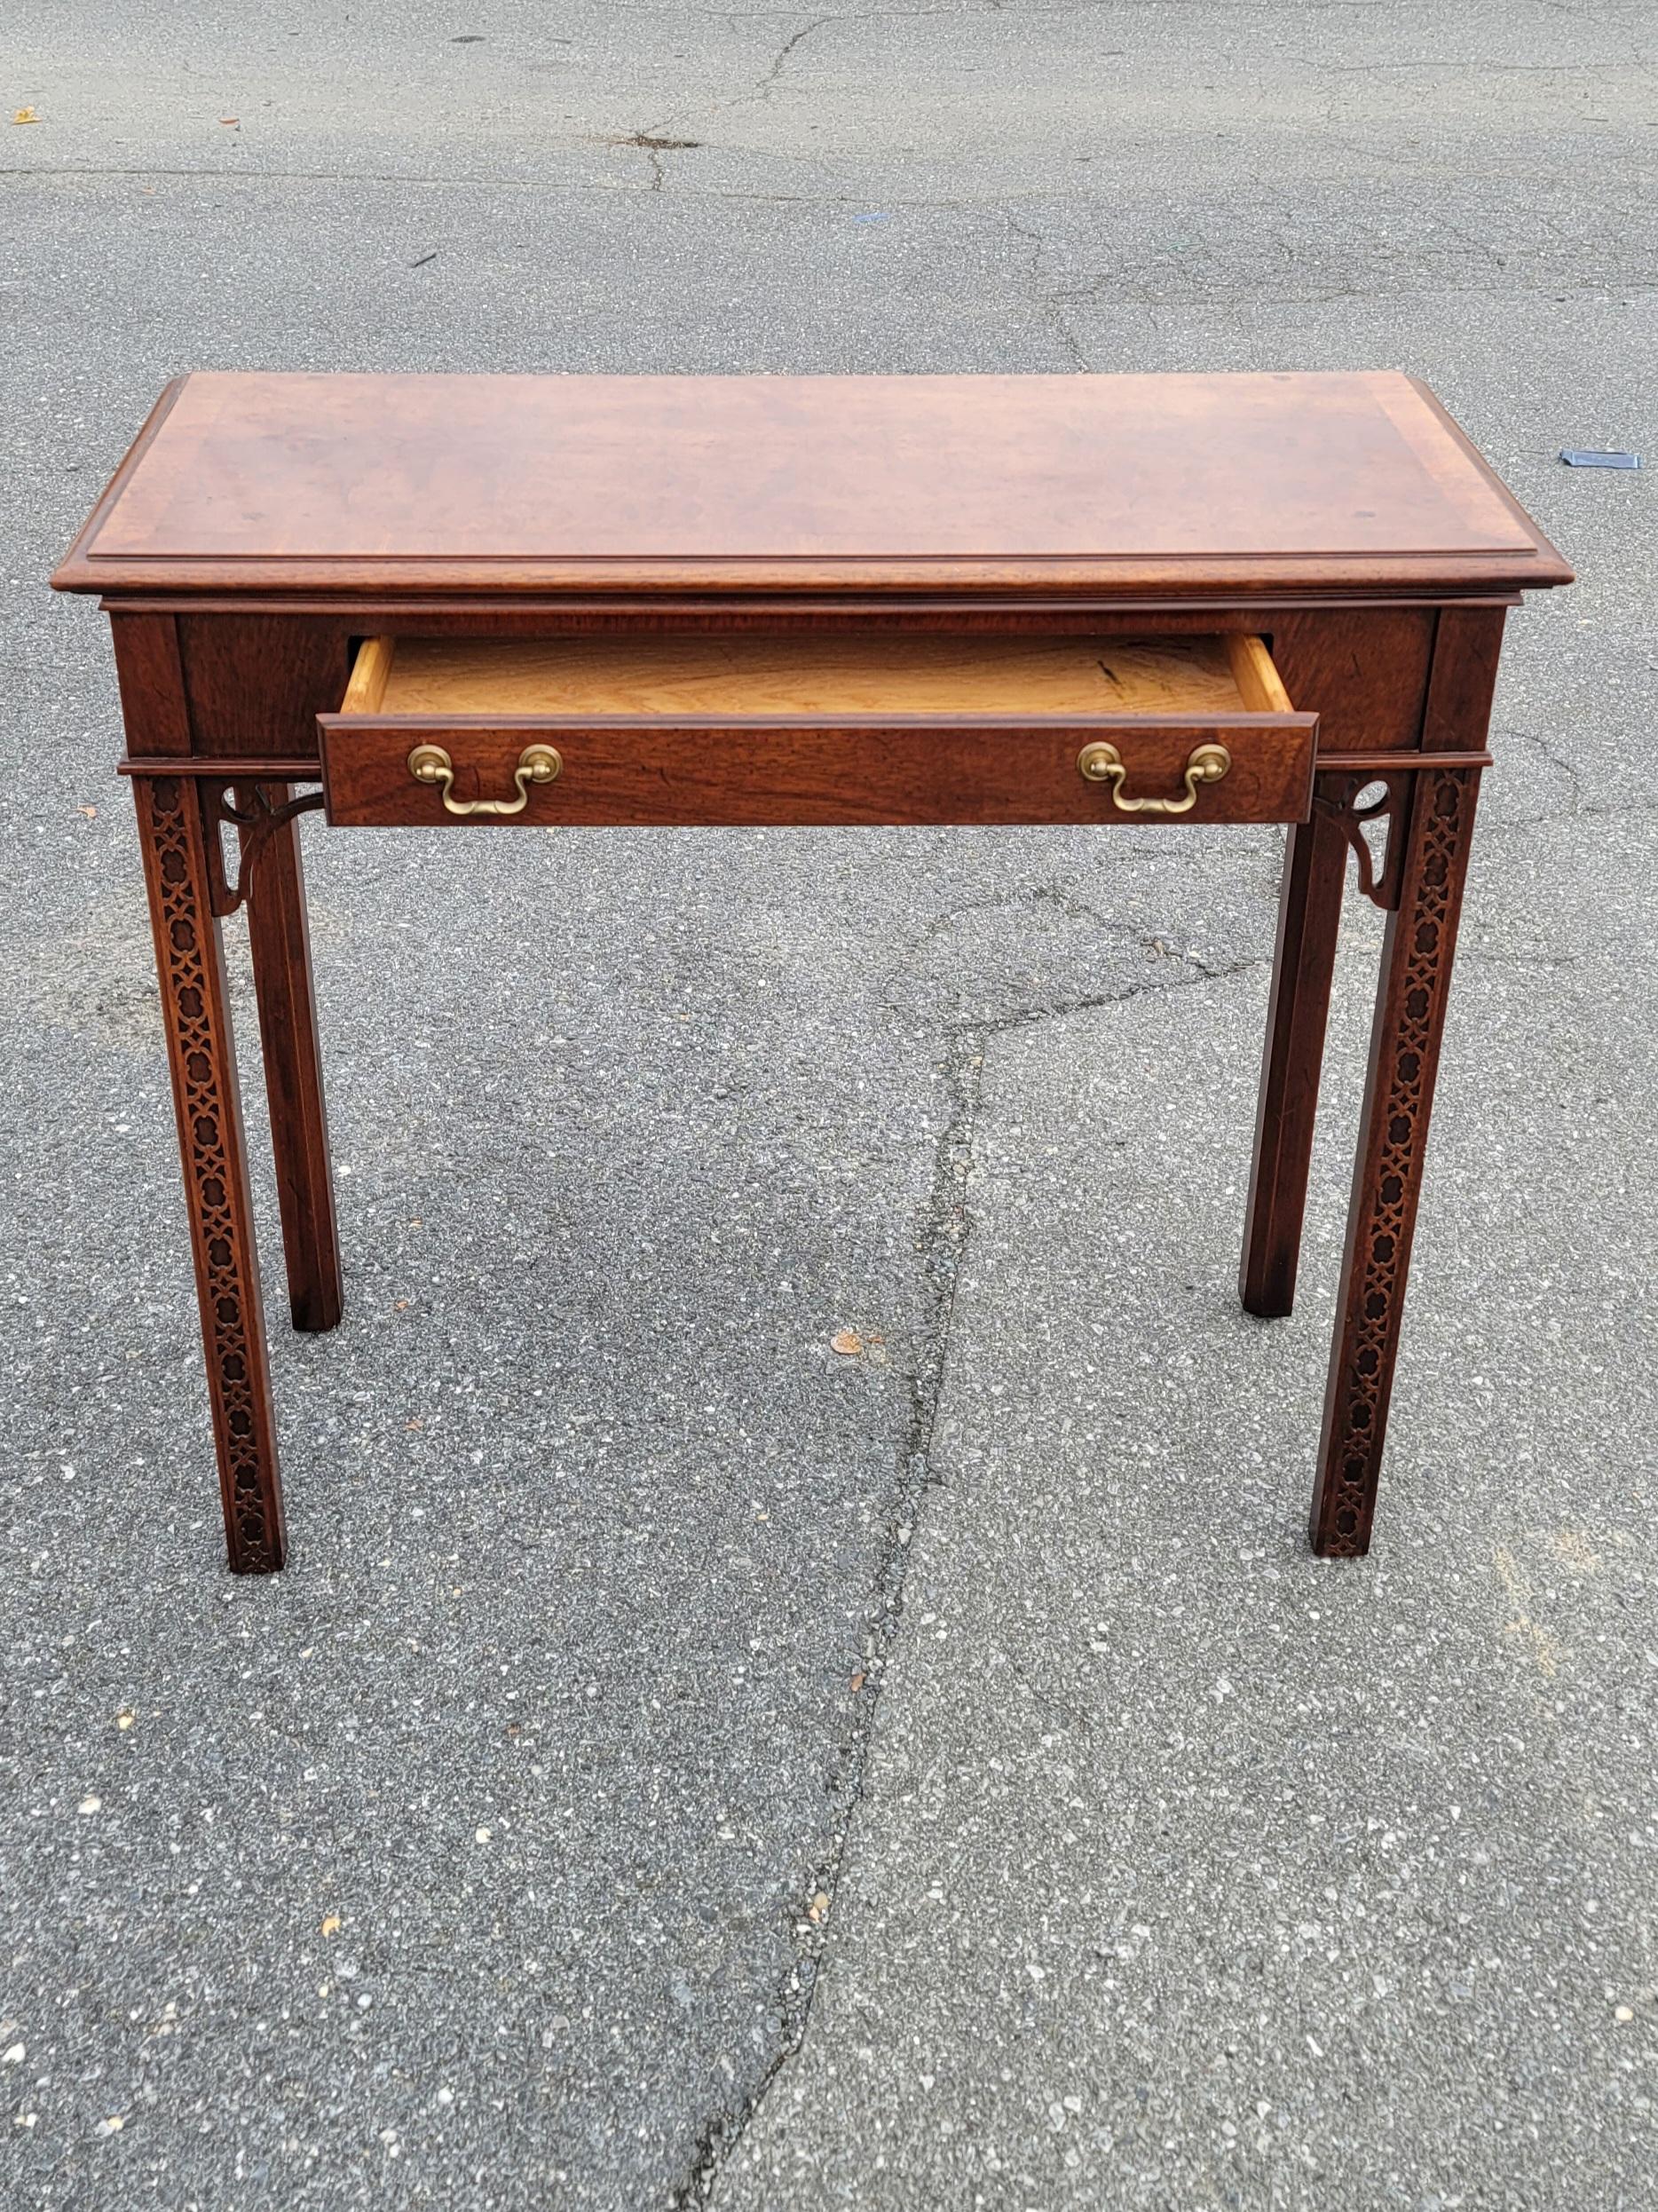 1970s Chippendale Walnut Burl Console Table with Fretwork and Banded Top For Sale 7